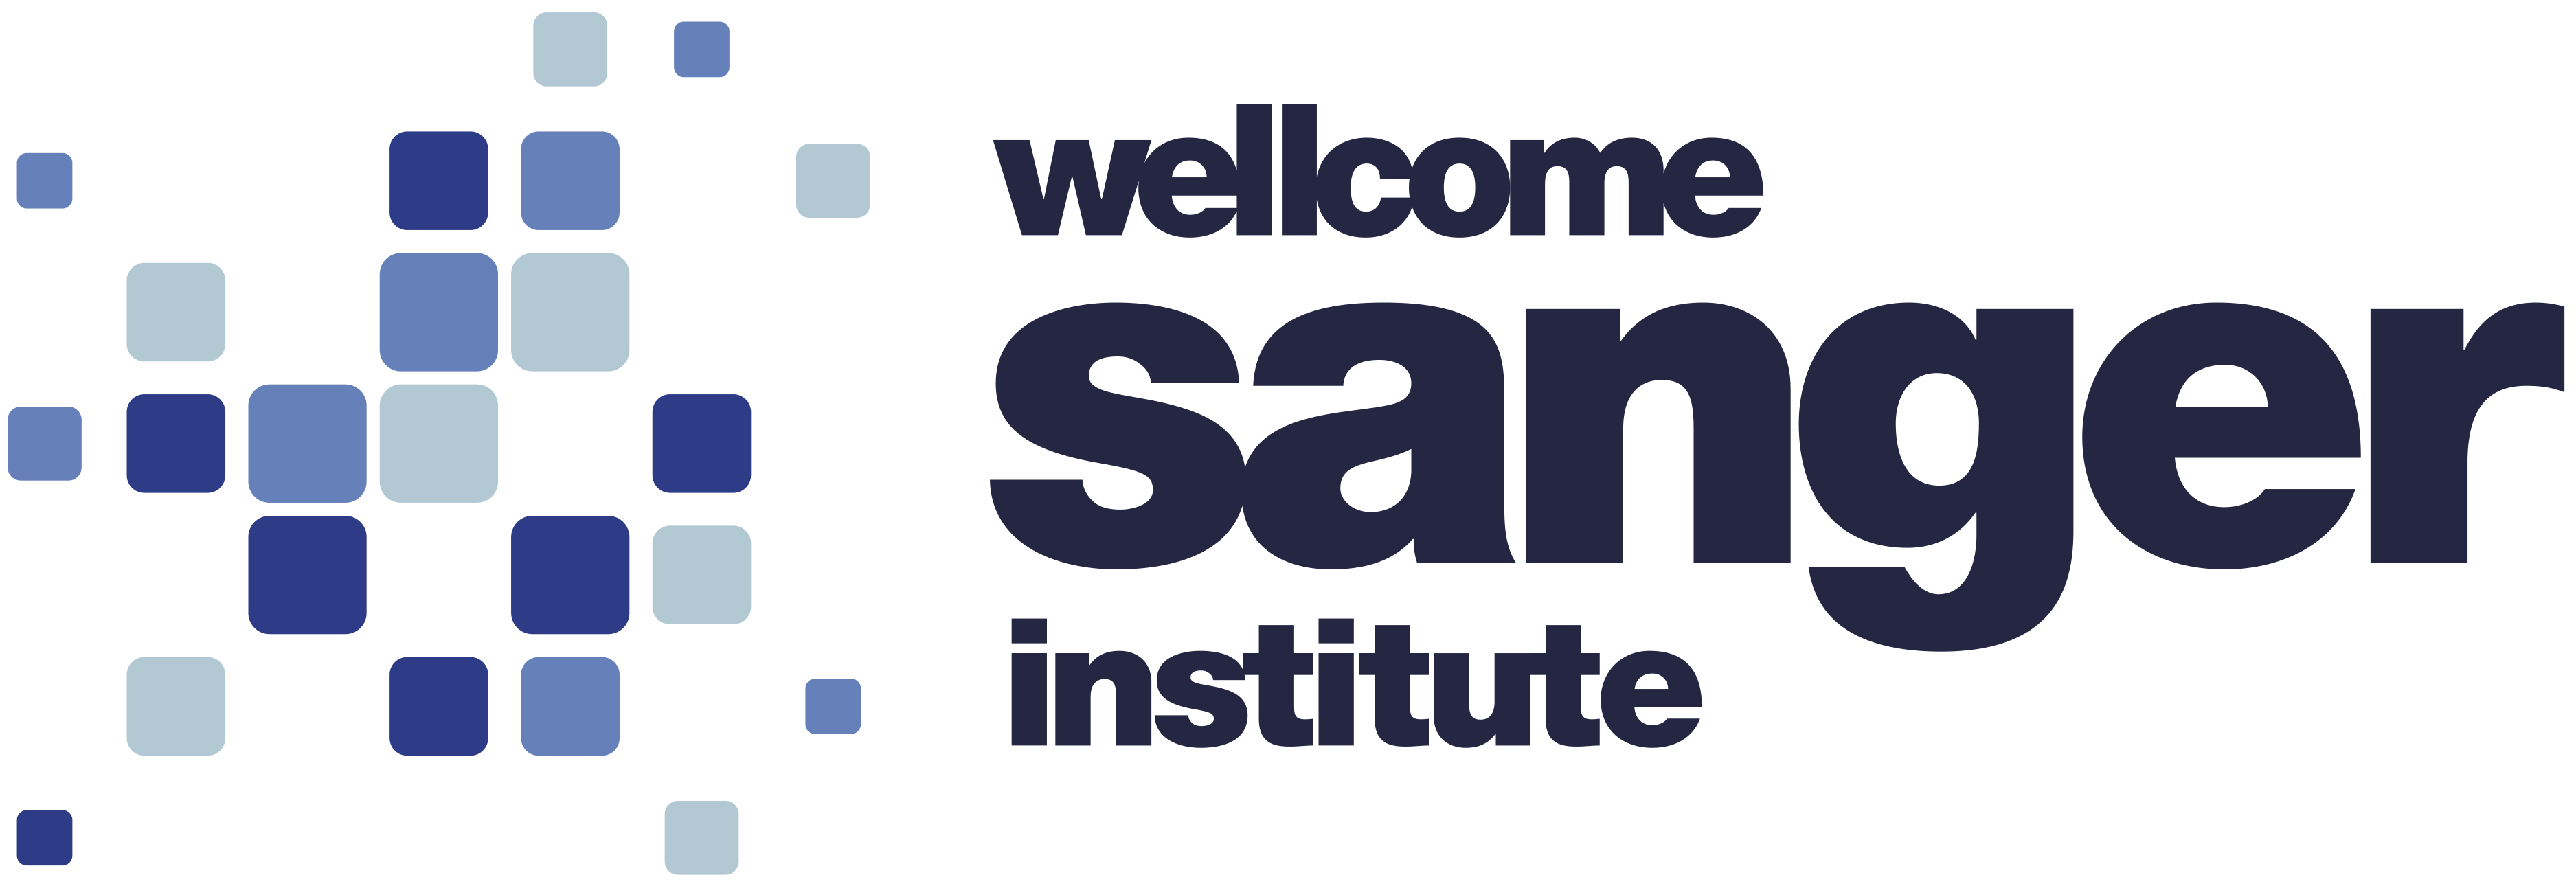 Wellcome Sanger Institute Branding Guidelines and Logos